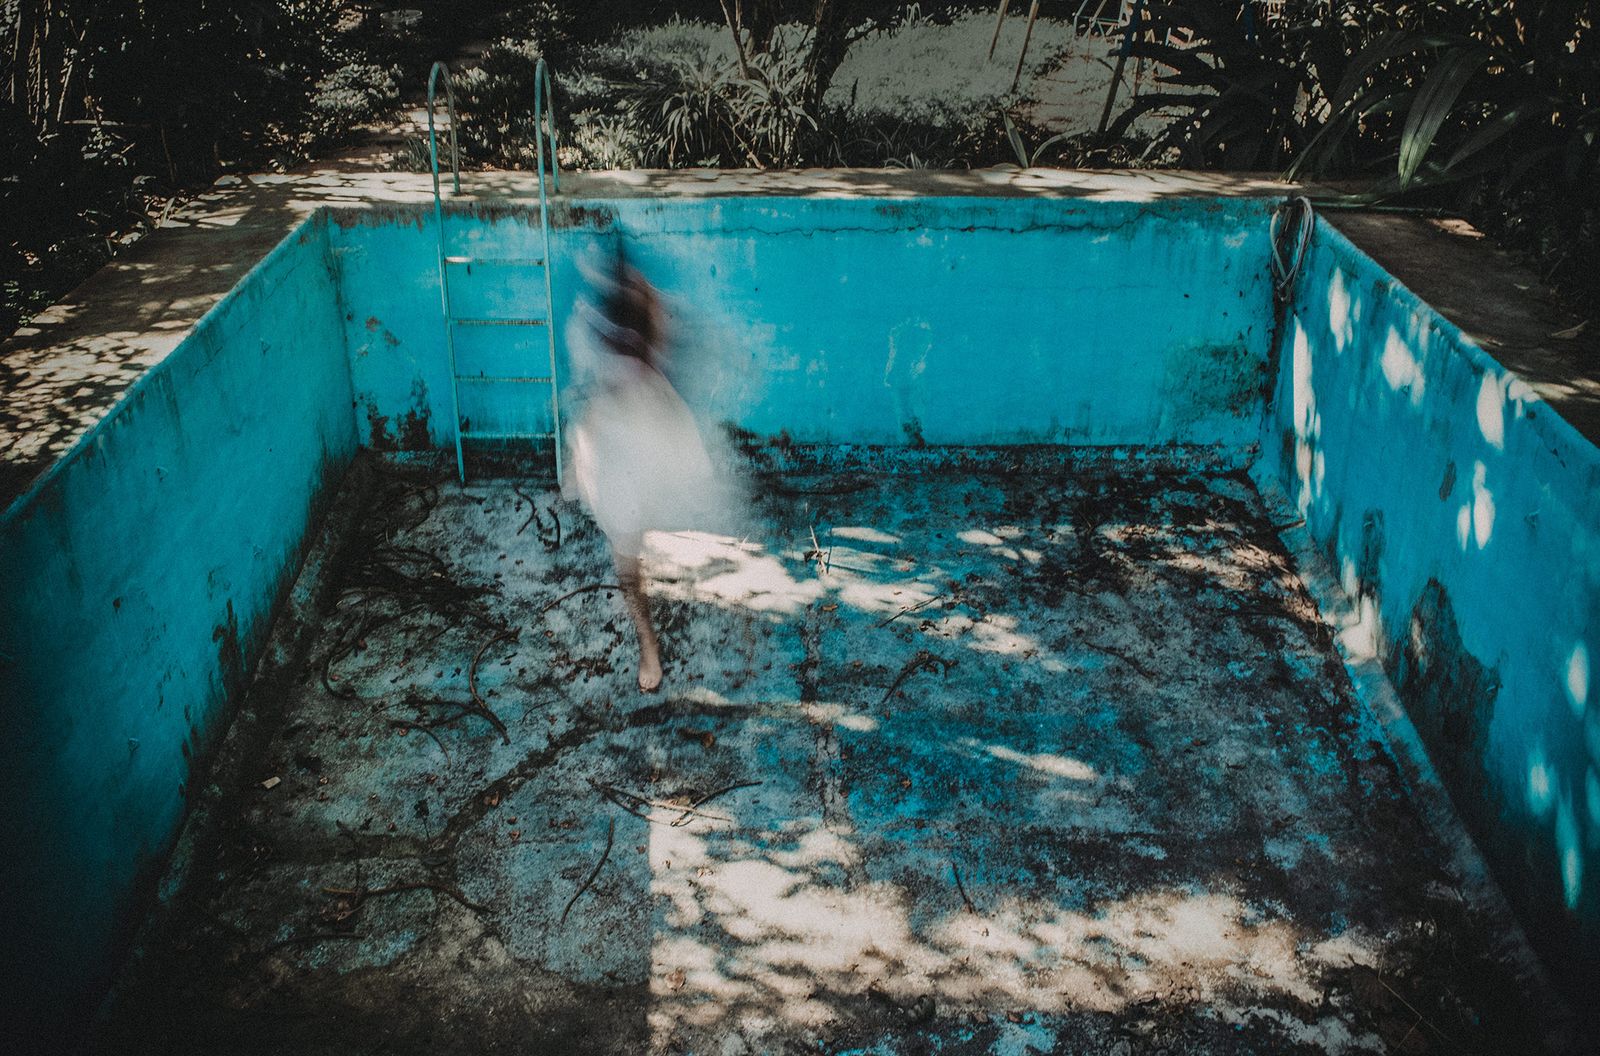 © Mariceu Erthal Garcia - Selfpotrait in the Pool where Gemma used to swim almost every day after school.